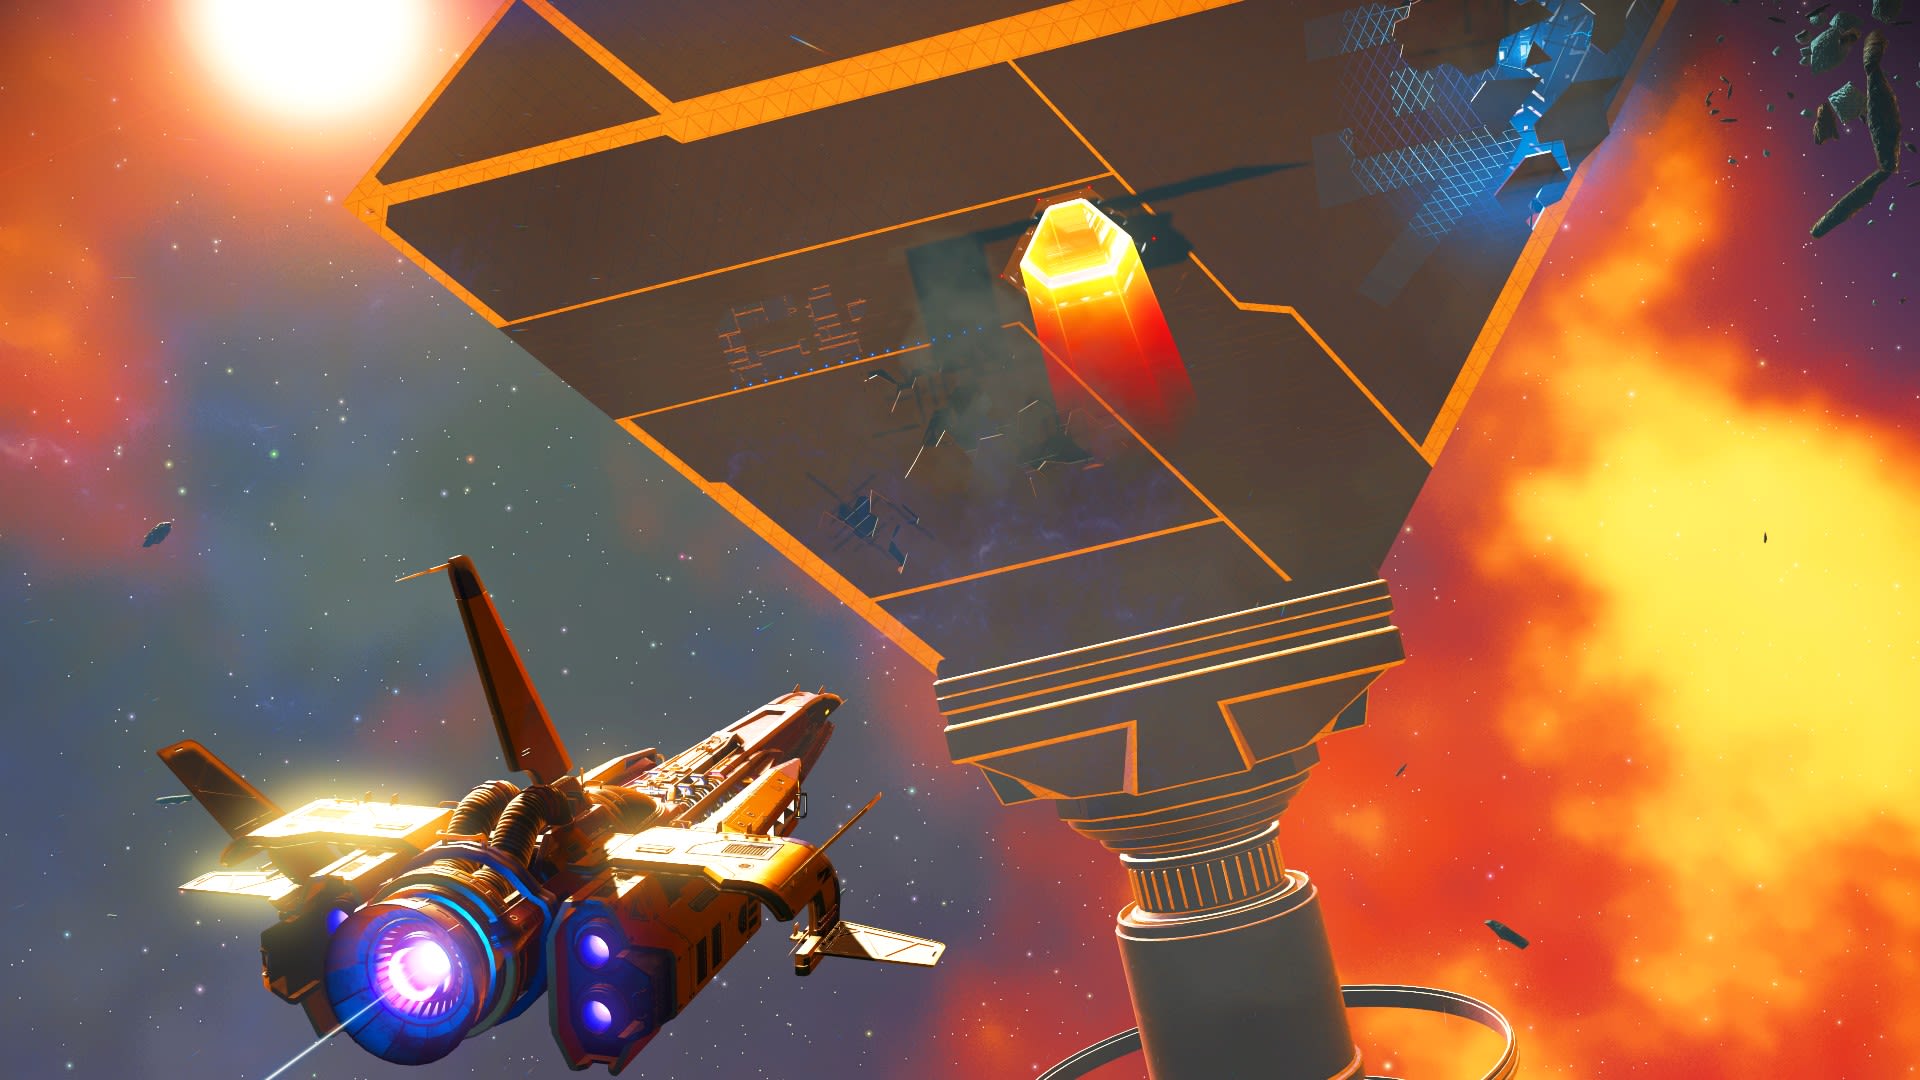 The new No Man's Sky update takes it back to the original pre-launch version